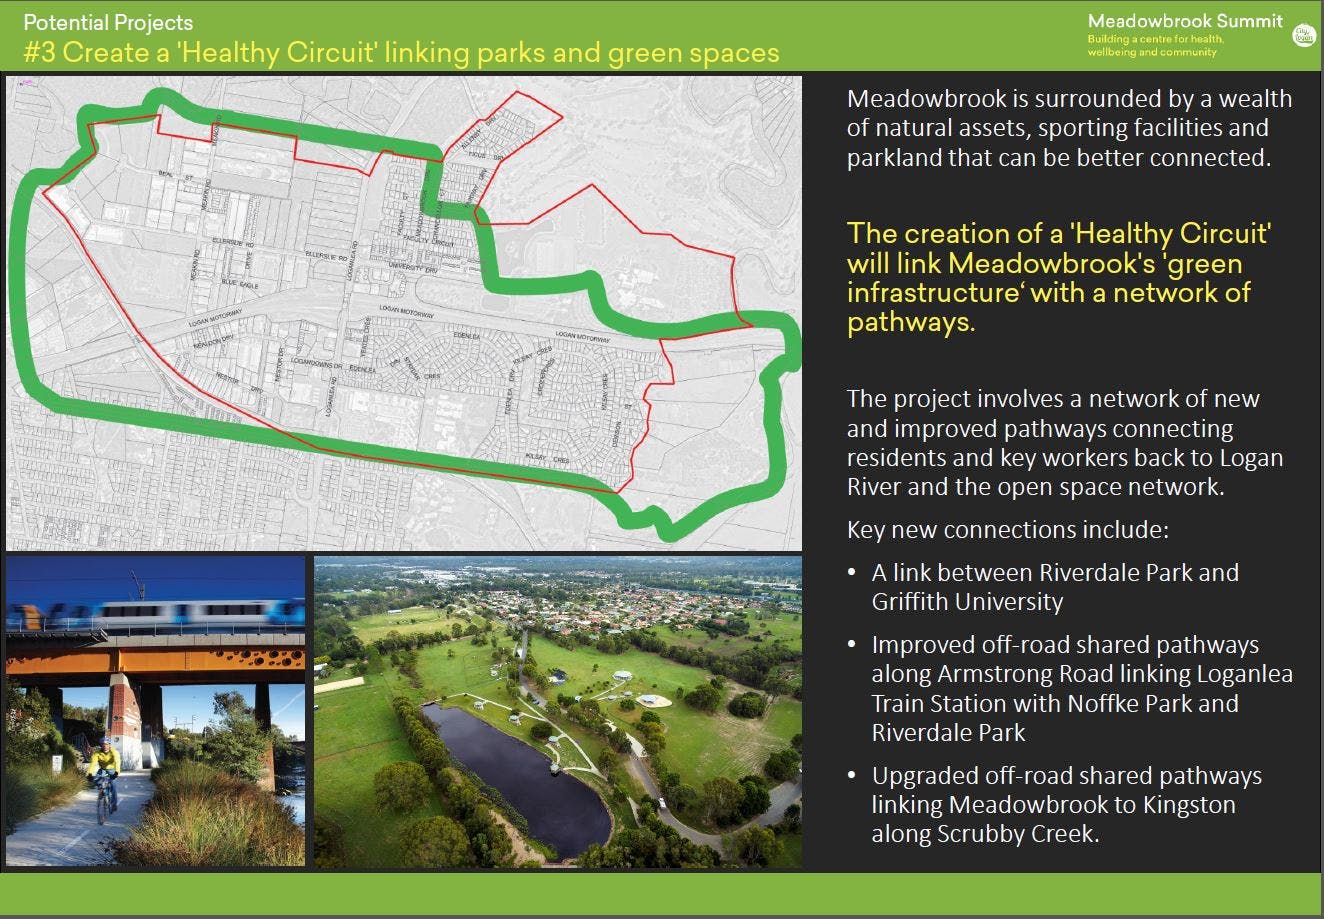 3. Create a 'Healthy Circuit' linking parks and green spaces